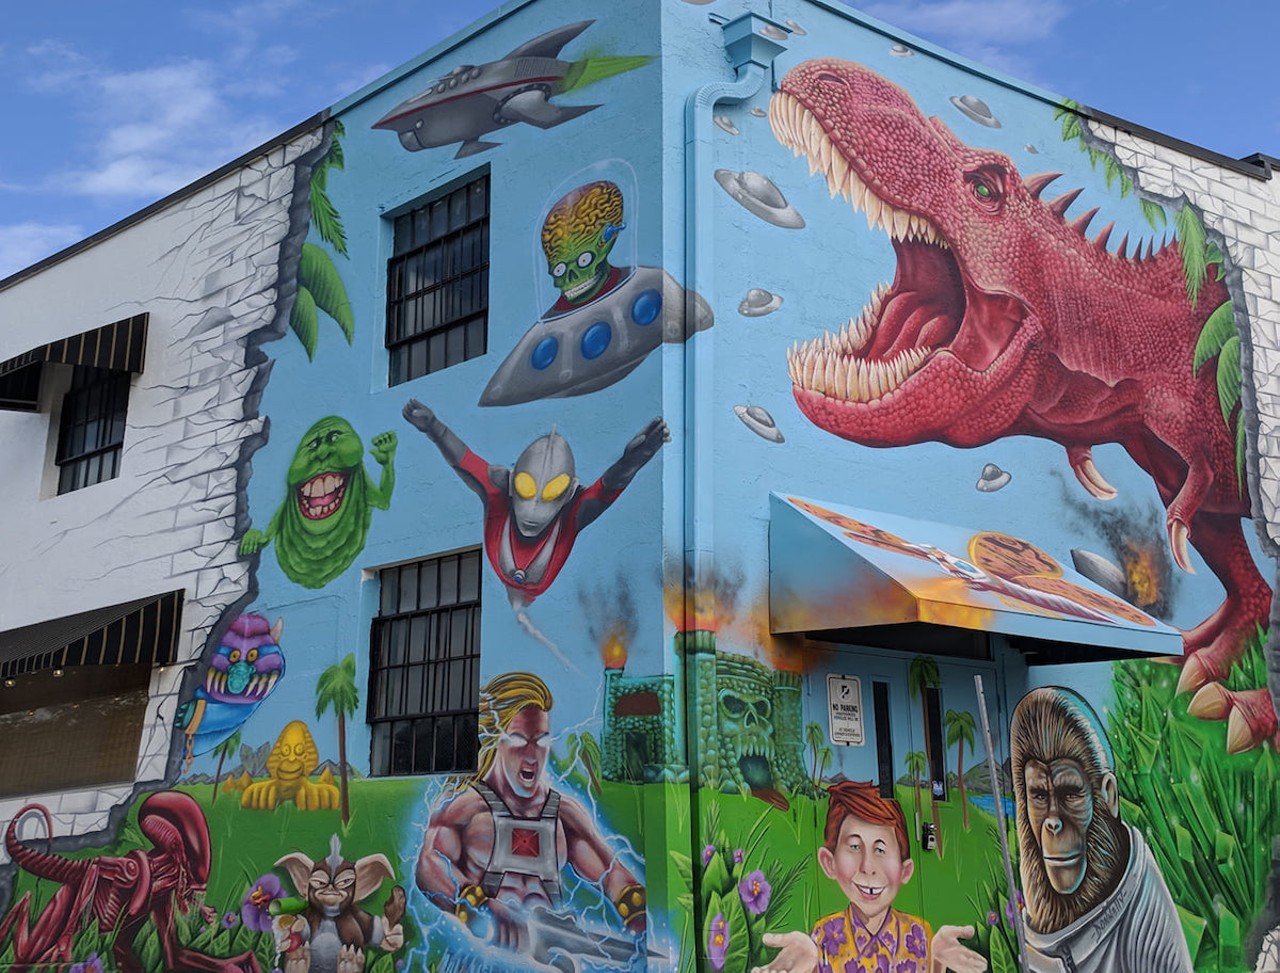 Flashback to your childhood with 1970s-1990s pop nostalgia in St. Pete’s Edge District
269 16th St. N, St. Petersburg
The big red dinosaur at on 16th Street made a lot more sense when the building was a toy store back in 2019, but Cultosaurus the toy store now lives on Central Avenue. Cultosaurus the mural, which features “Ghostbusters,” “Planet of the Apes,” and Mad Magazine imagery, is a tribute to 1970s-1990s pop culture that we hope stands the test of time.Photo via cultosaurus/Facebook